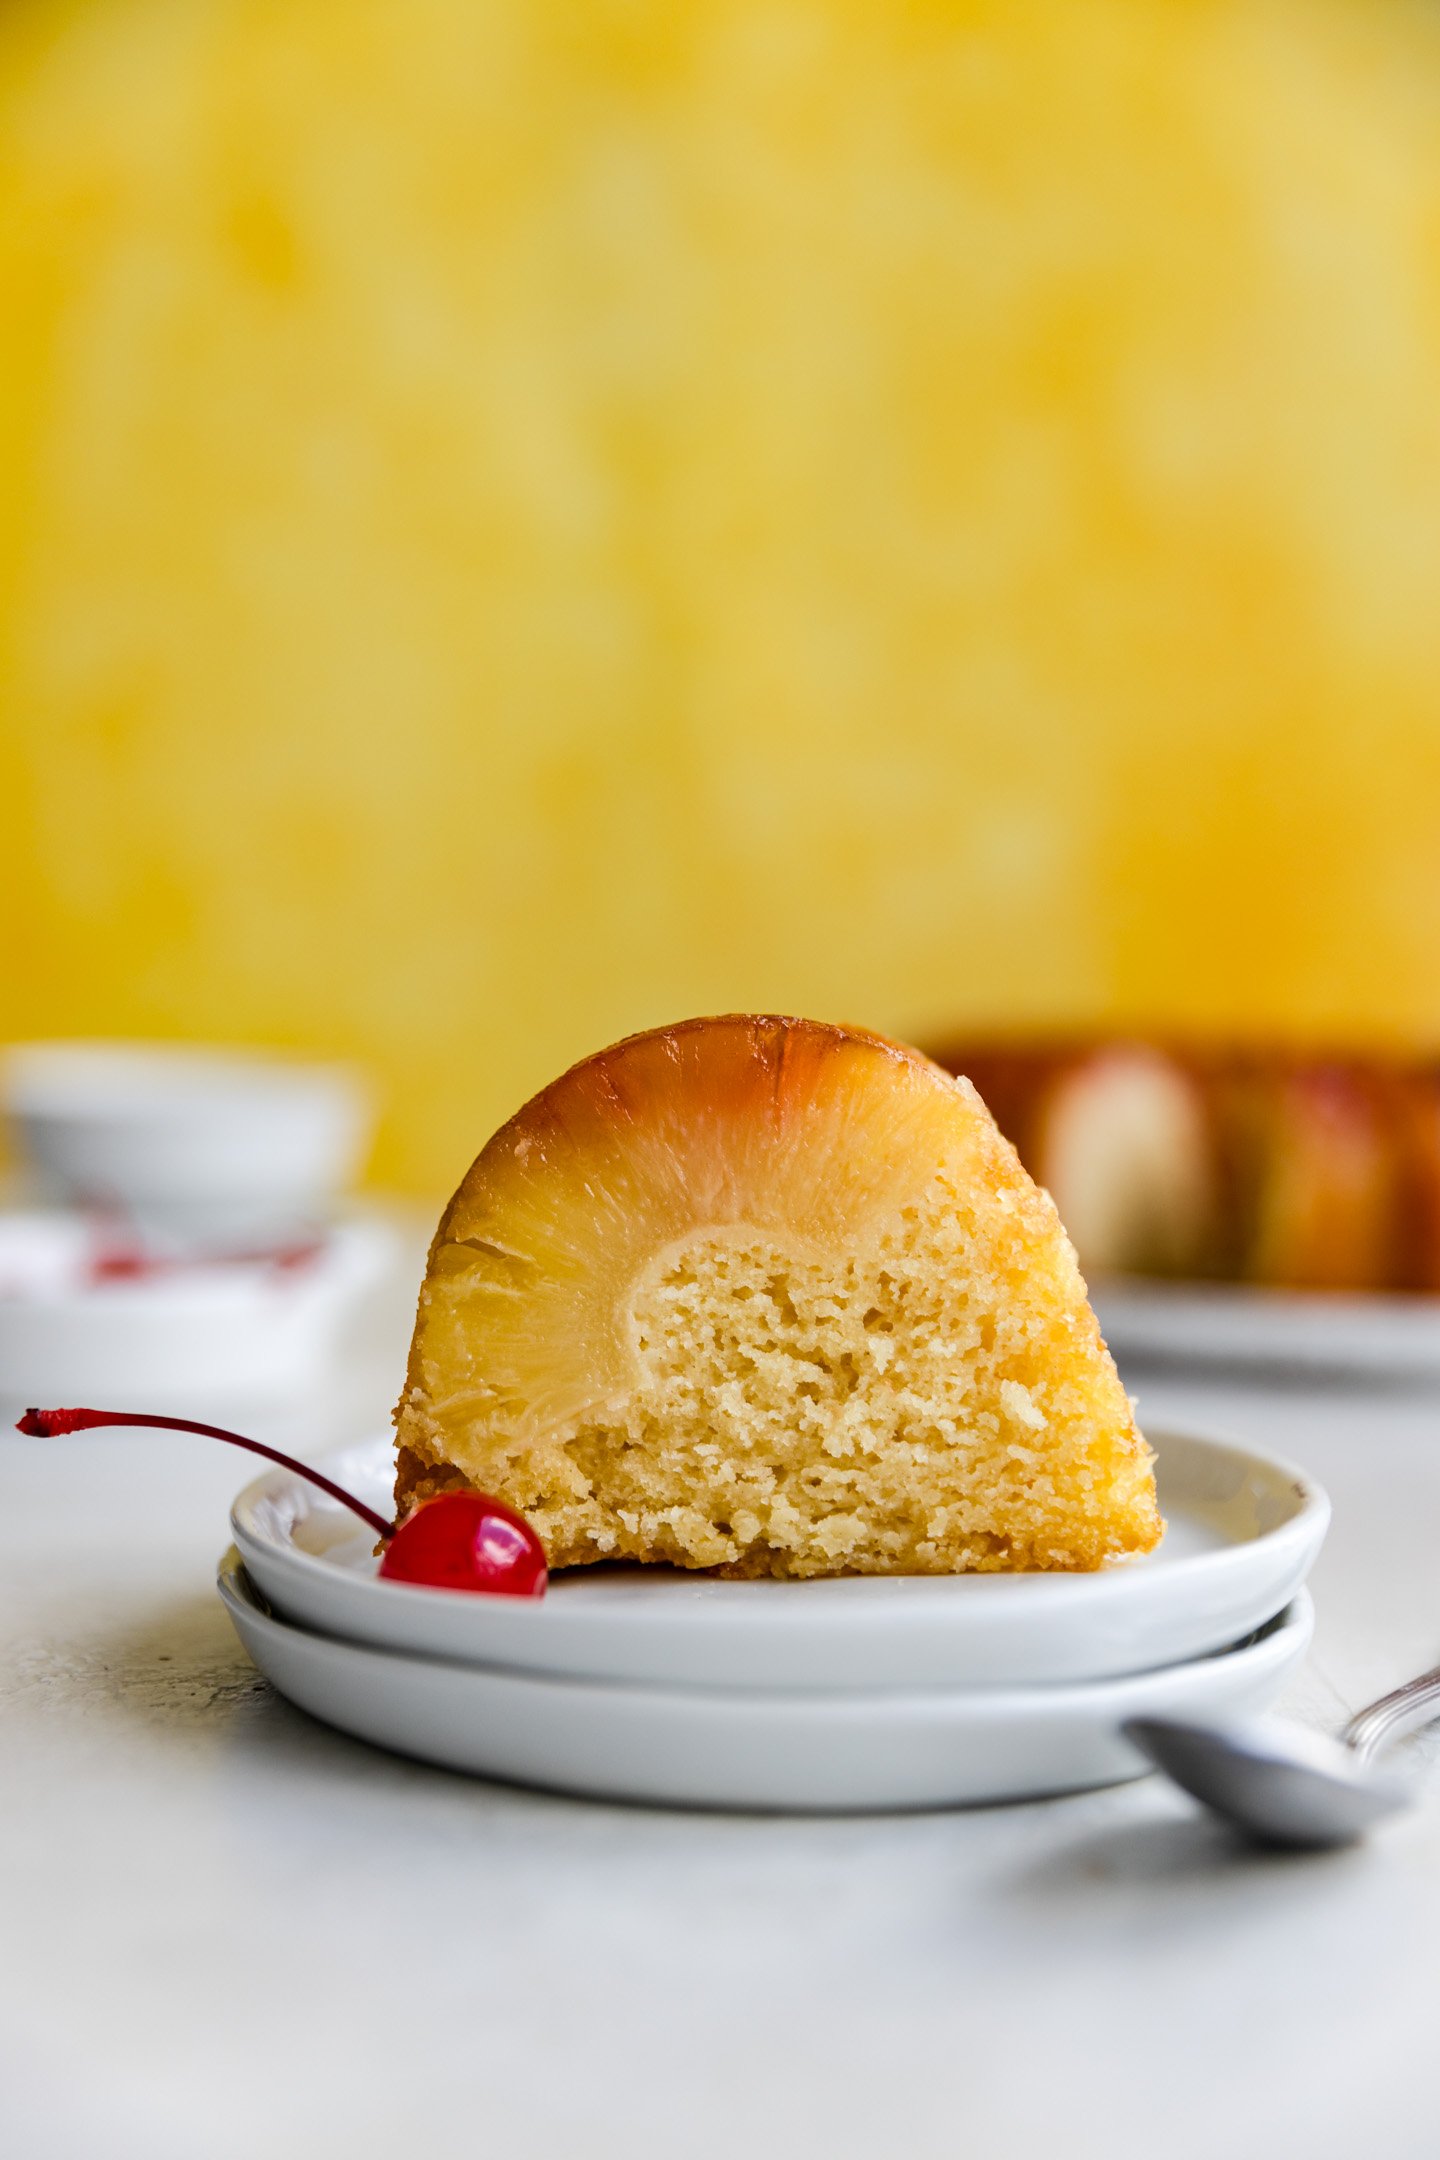 A slice of a pineapple upside down bundt cake on a stack of white plates.